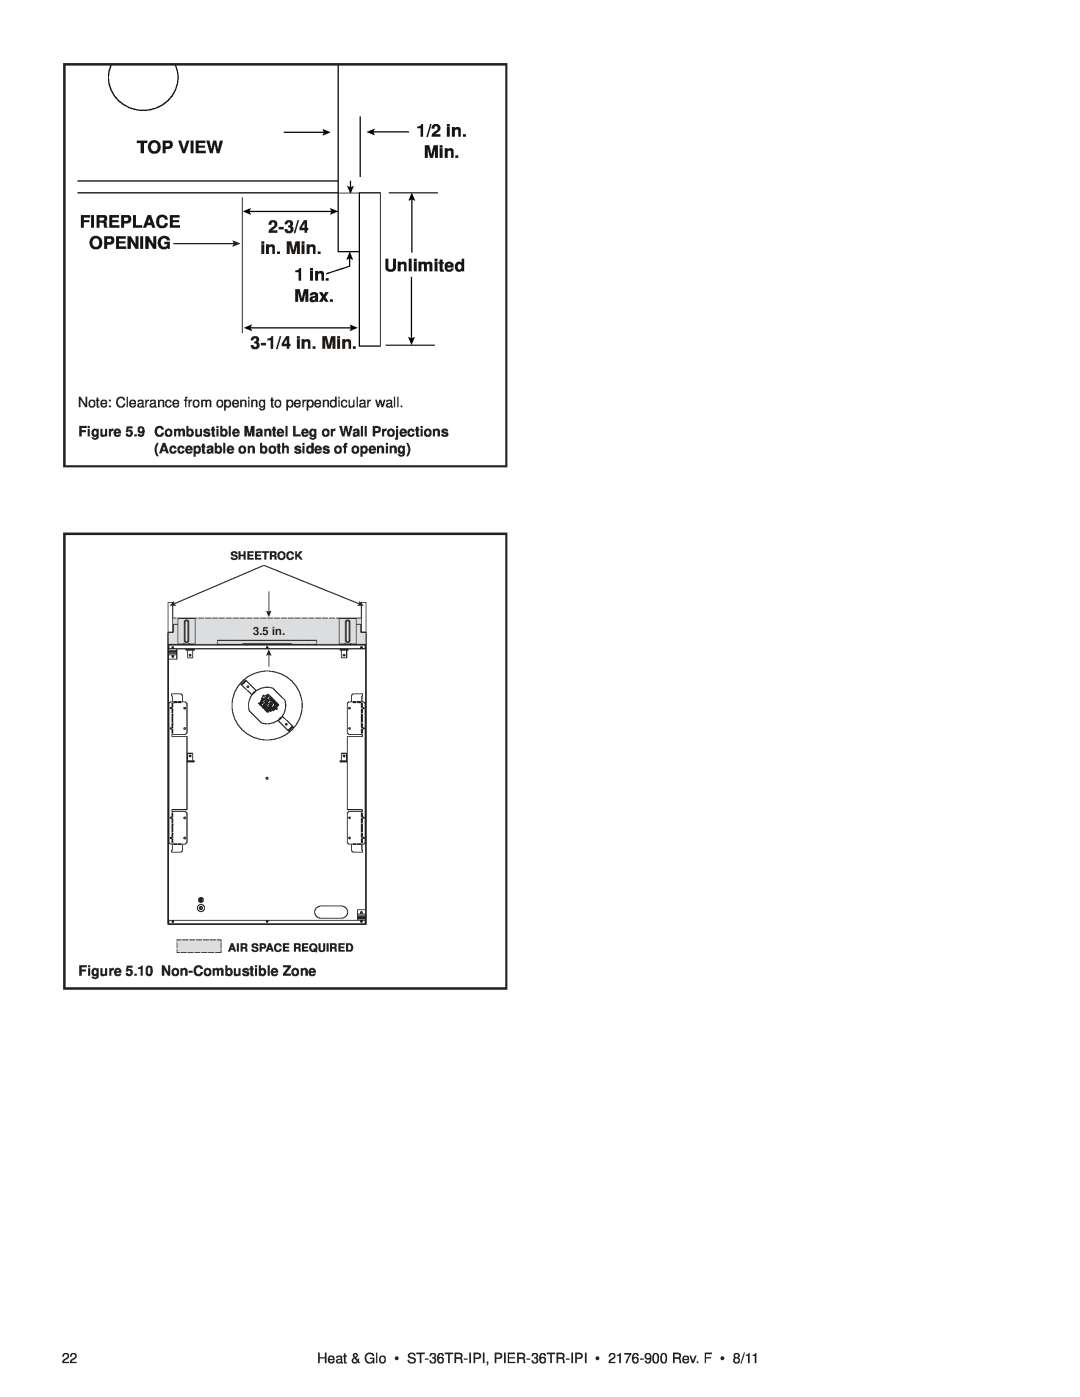 Heat & Glo LifeStyle ST-36TRLP-IPI owner manual Top View, 1/2 in, Fireplace, 2-3/4, Opening, Unlimited, 1 in, 3-1/4 in. Min 